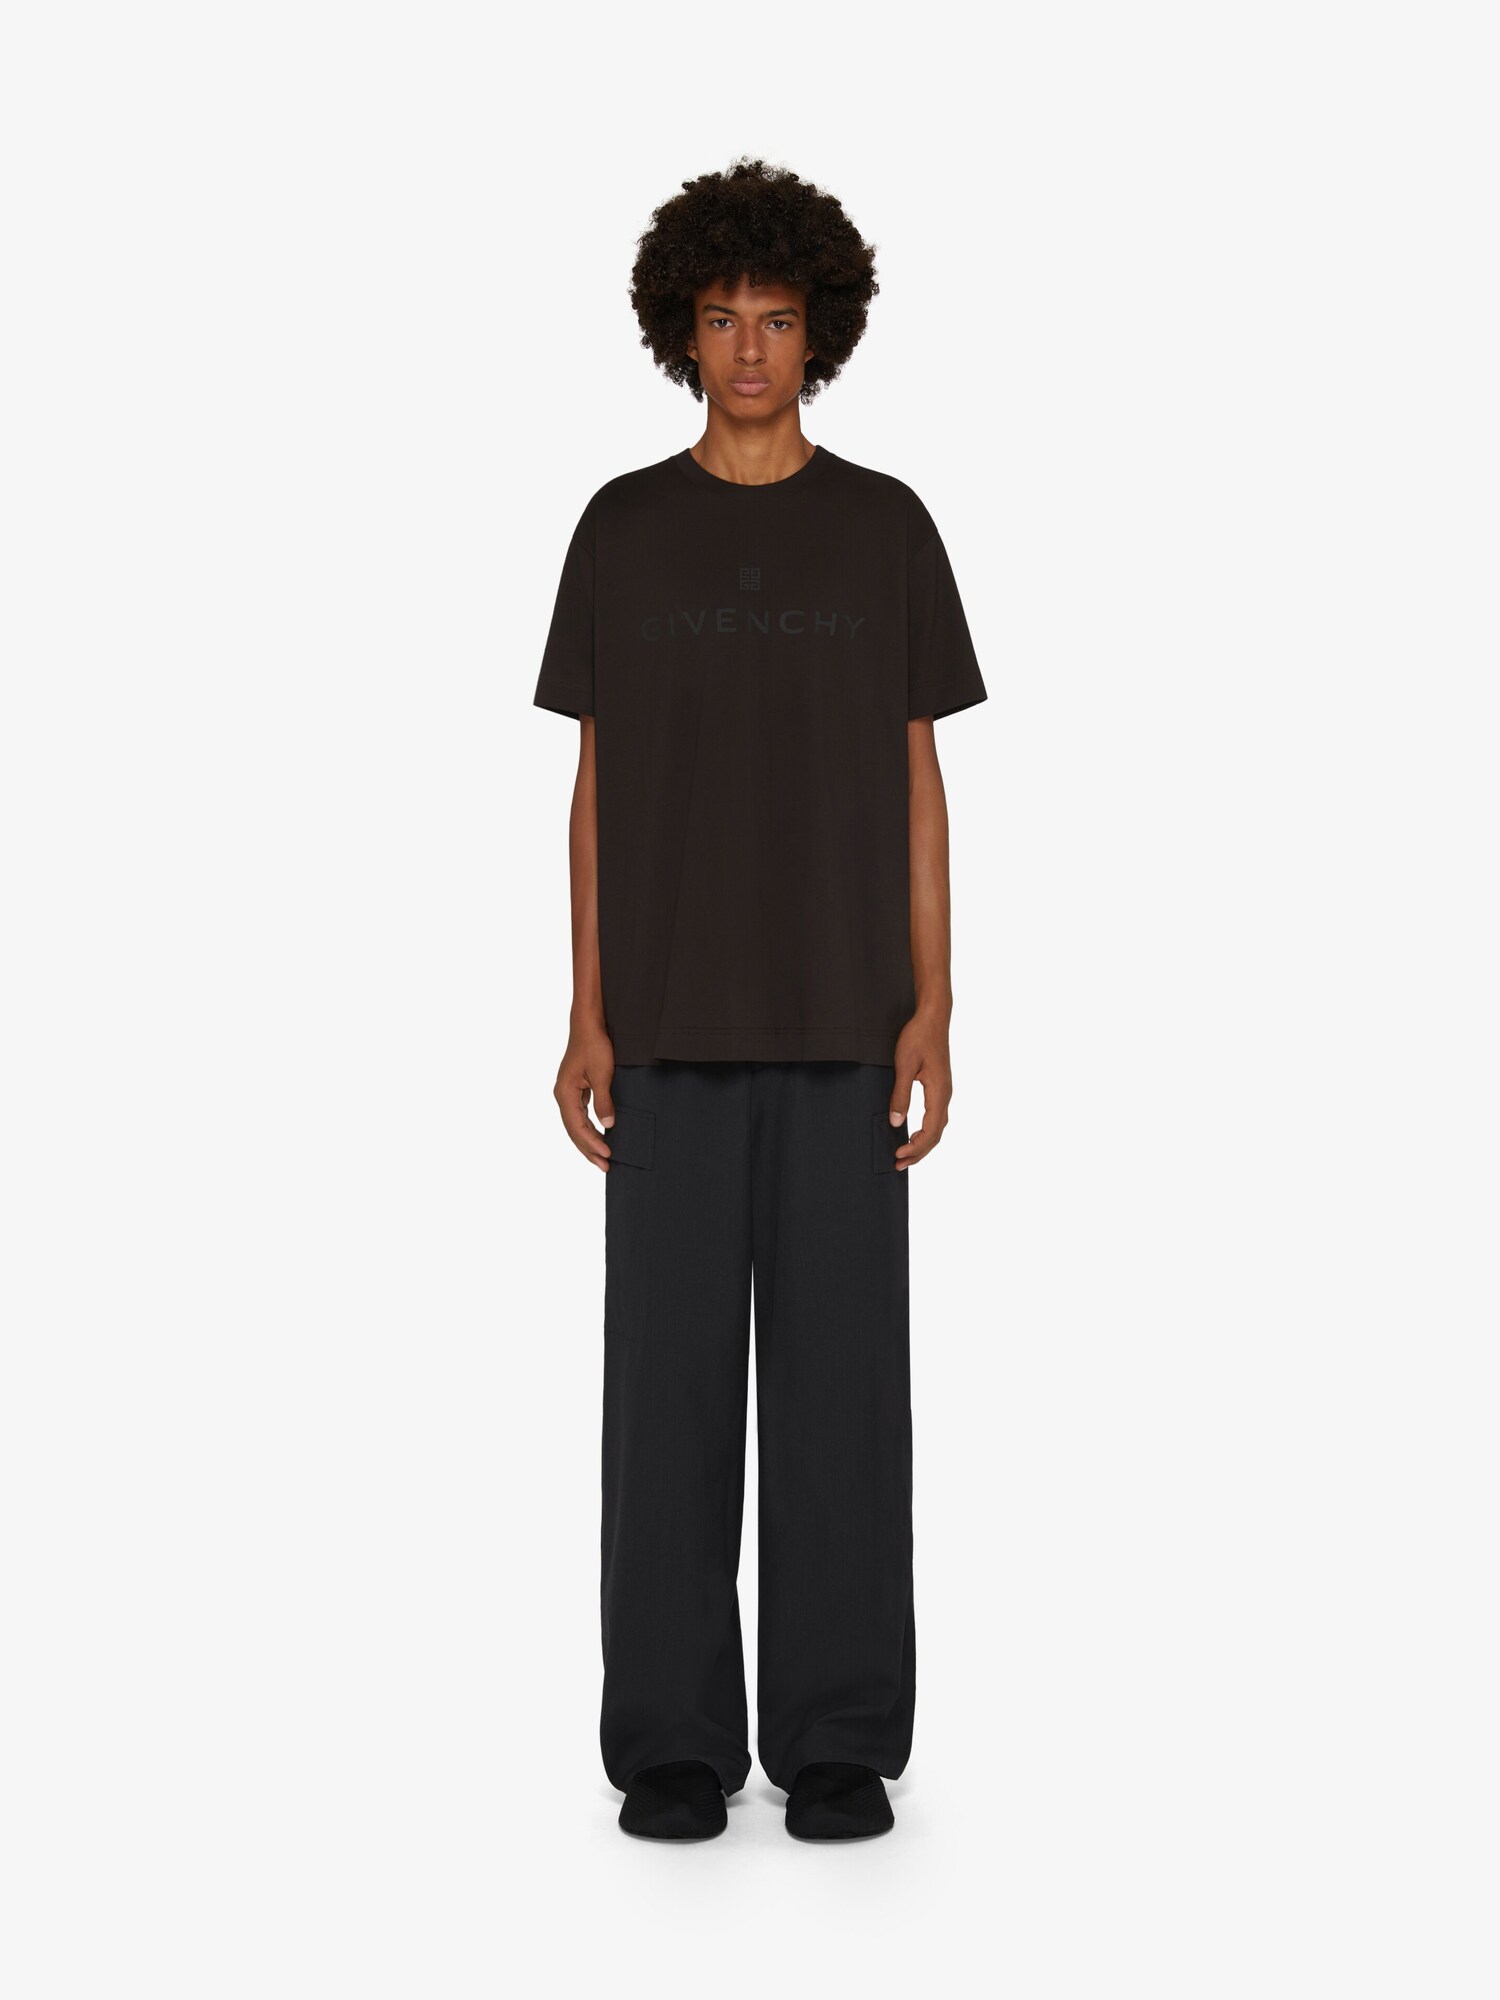 givenchy.com | Oversized pants in embroidered wool - charcoal